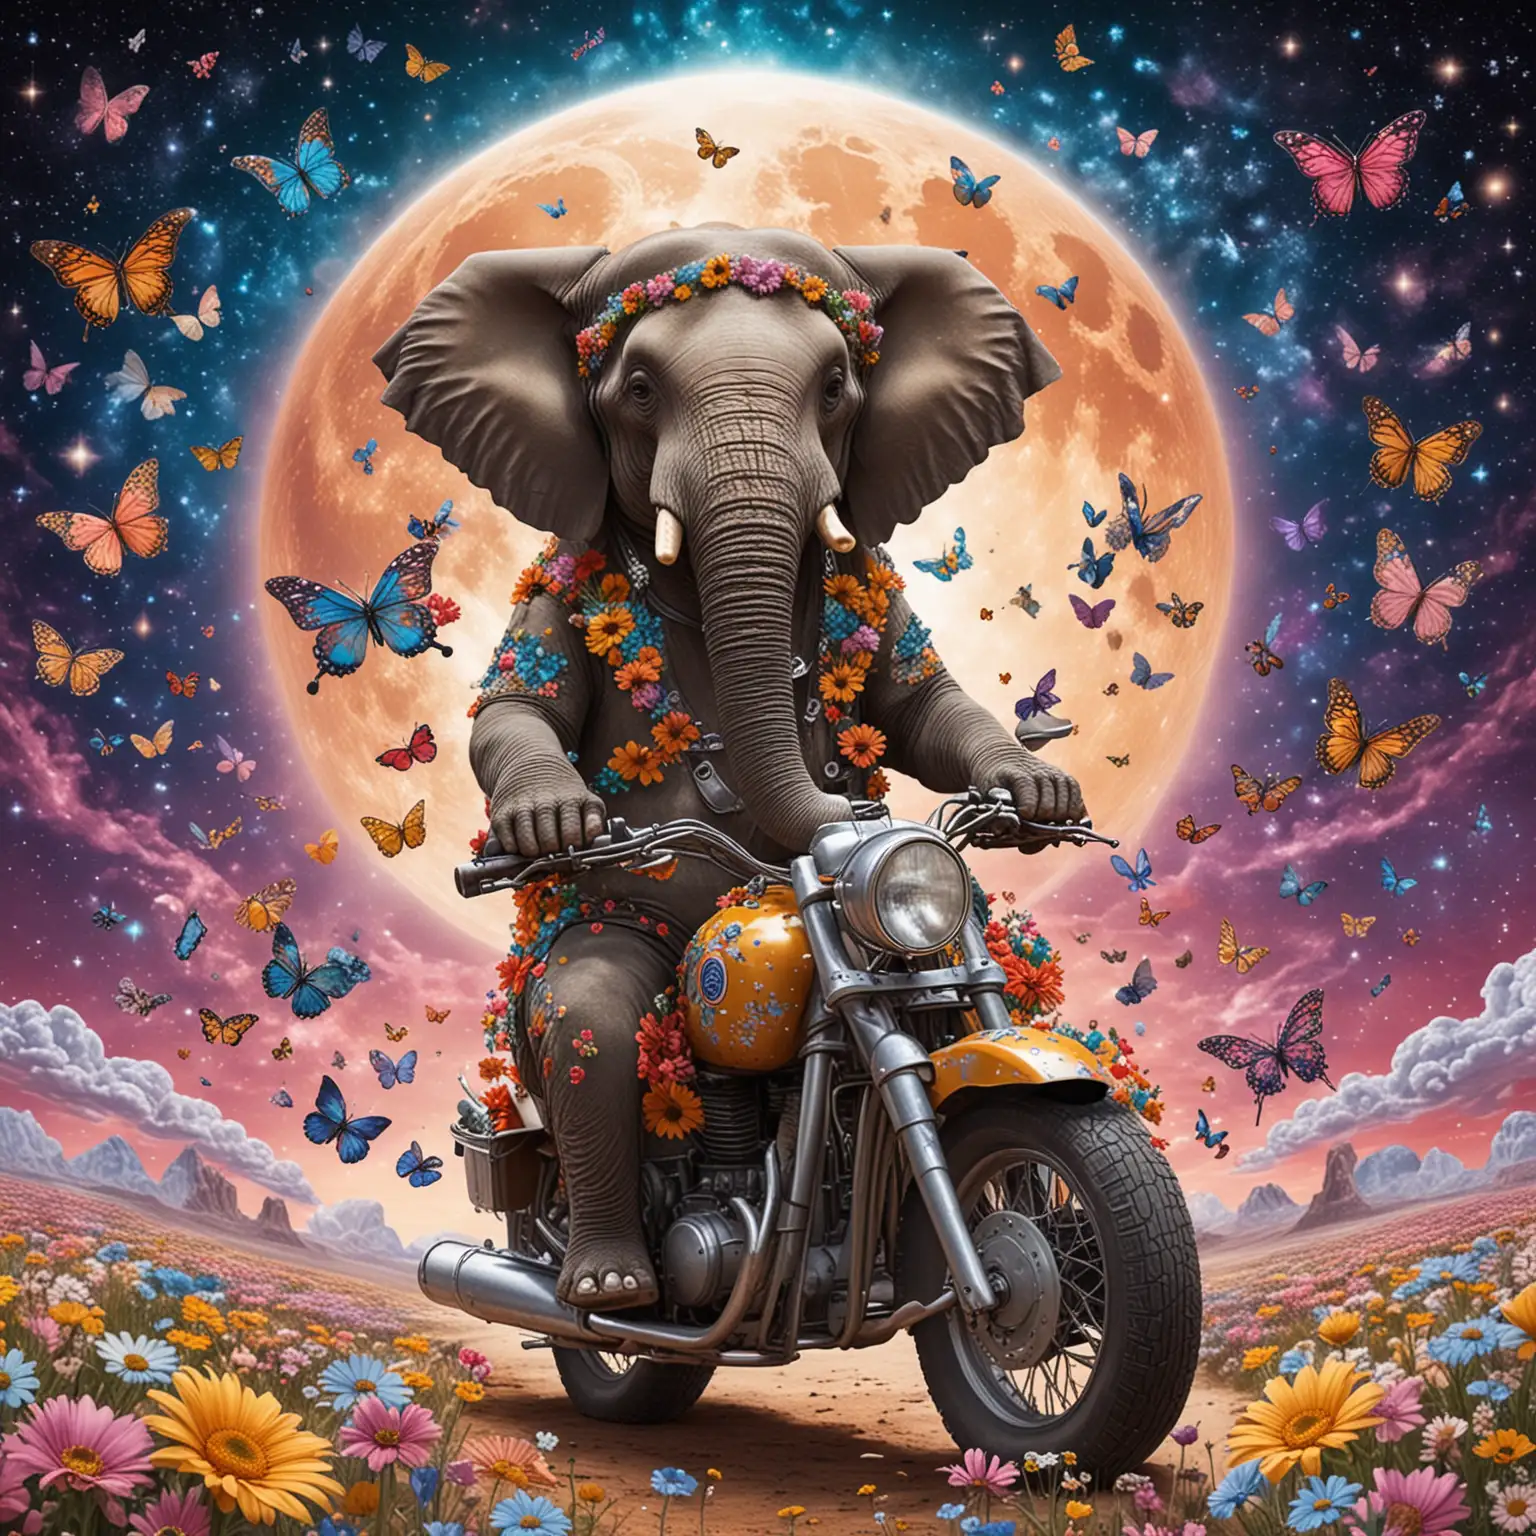 Elephant Riding Motorcycle on Moon with Flowers and Galaxy Background